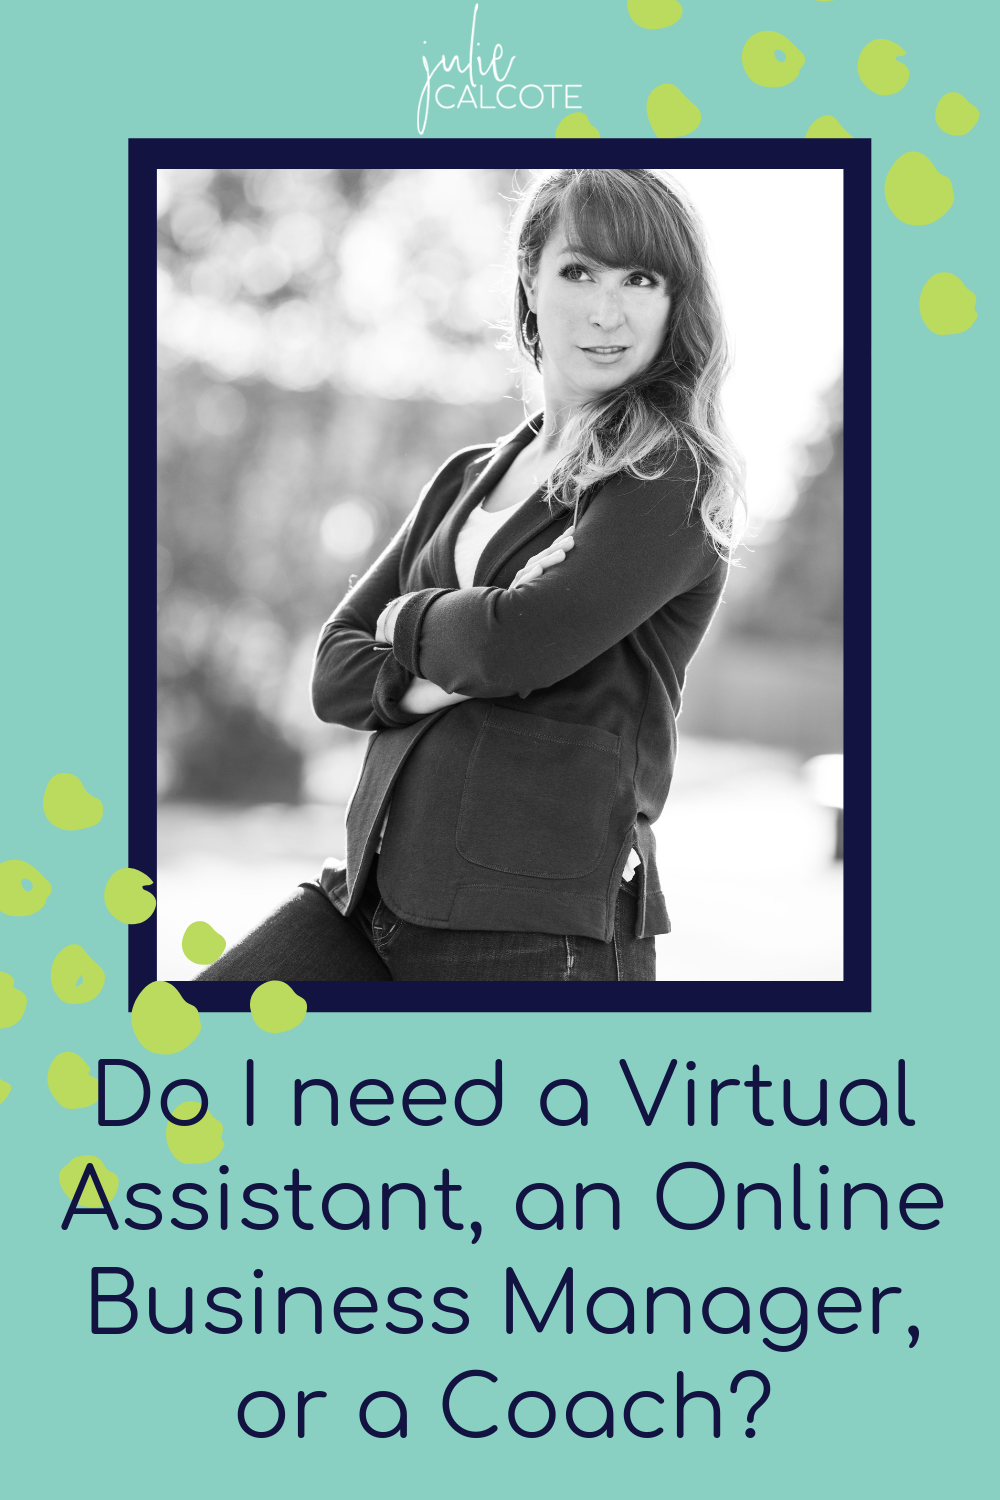 Do I need to hire a Virtual Assistant, Online Business Manager, or a Coach?